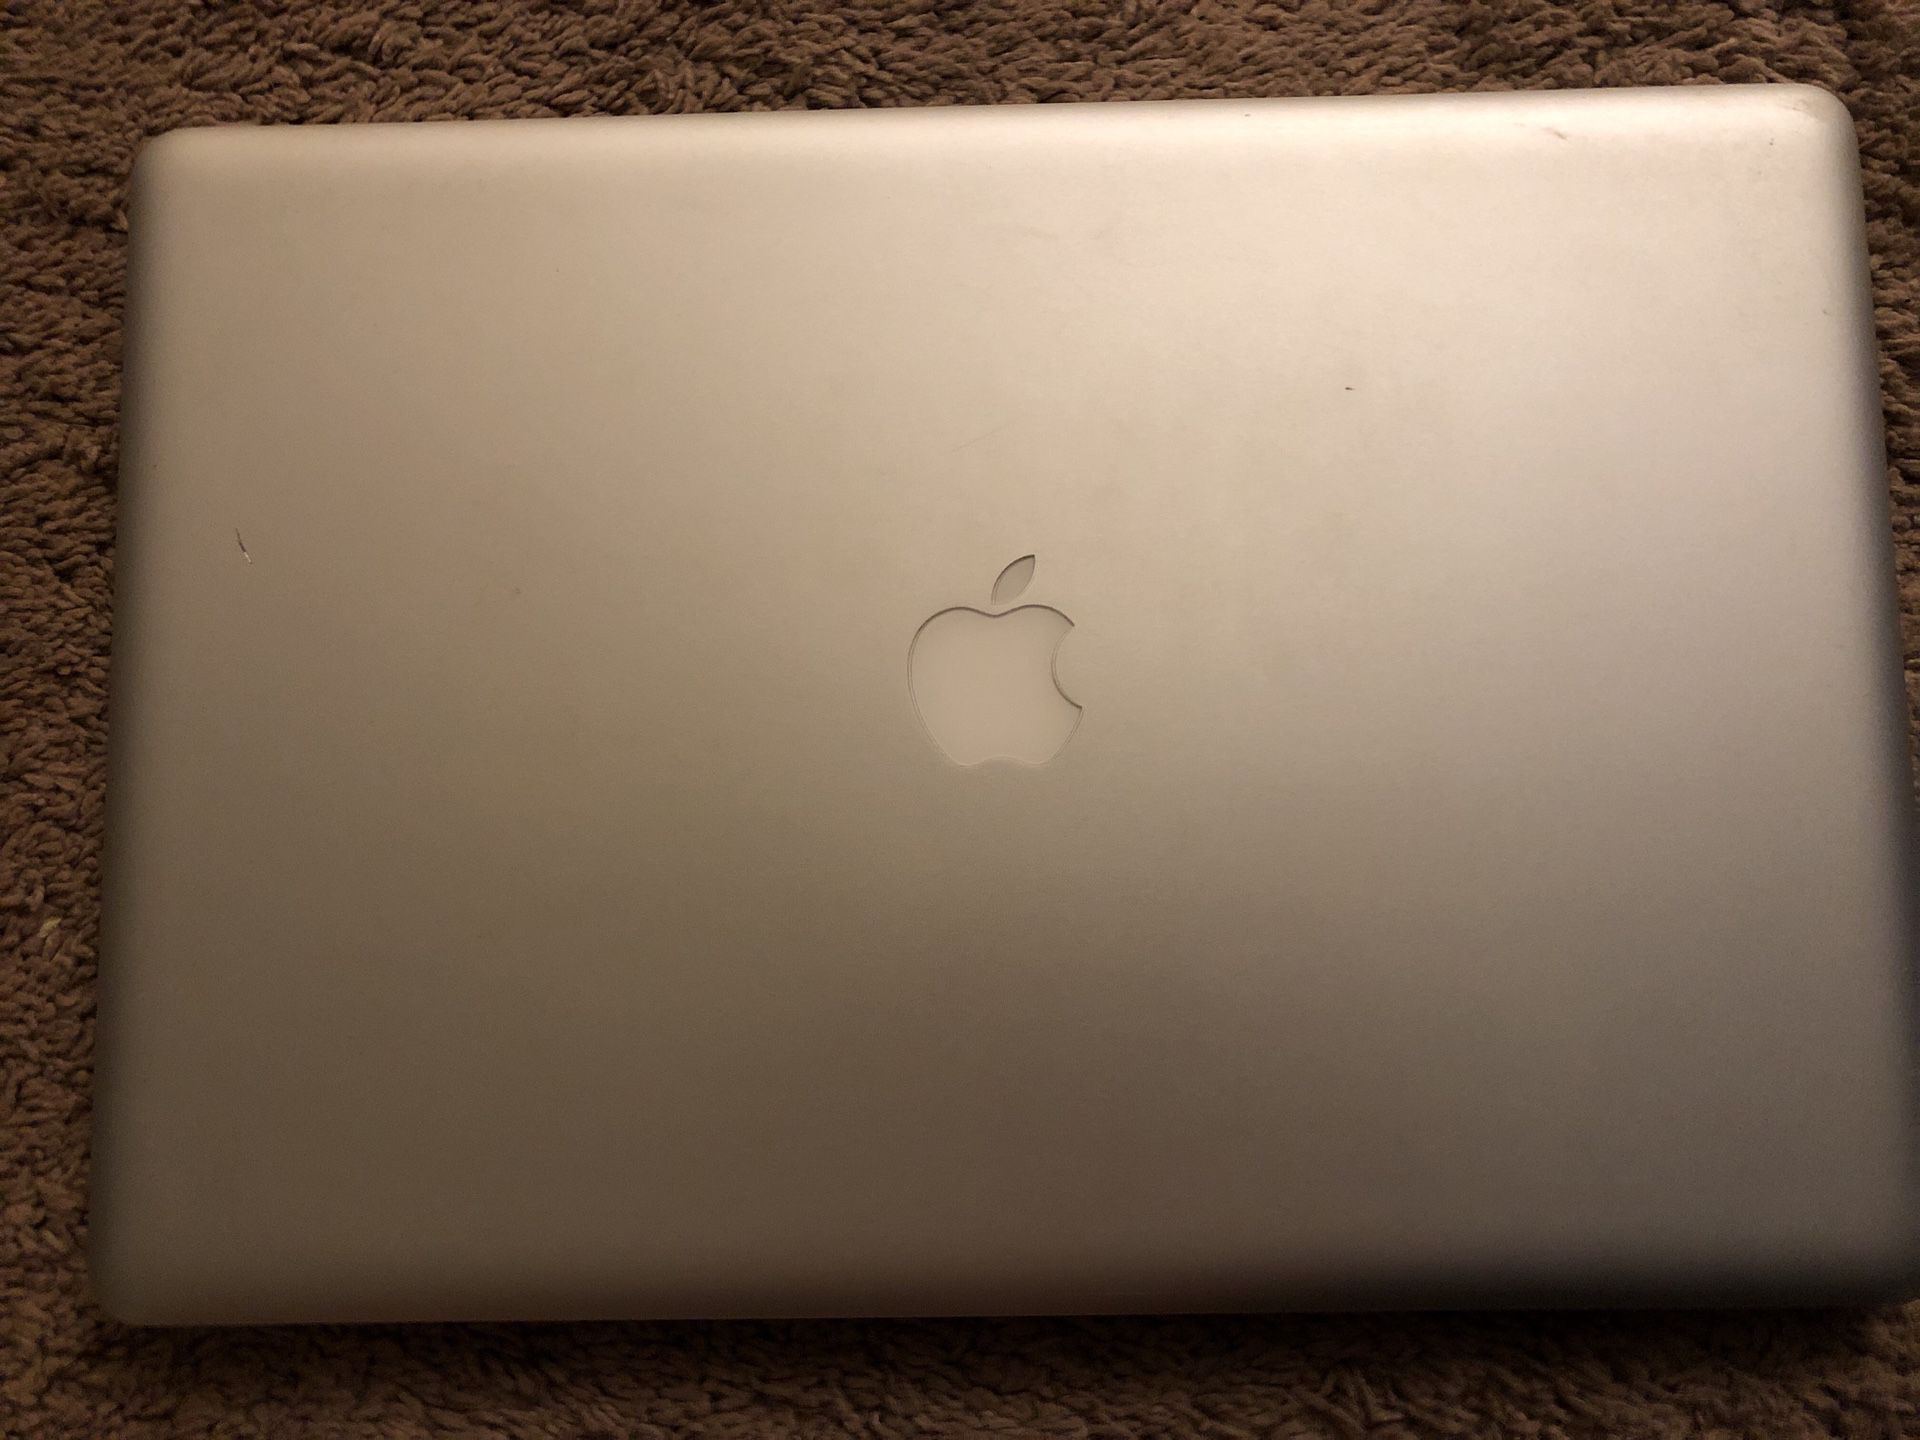 17” MacBook Pro. Either fix it up or use for parts! (Read Description)